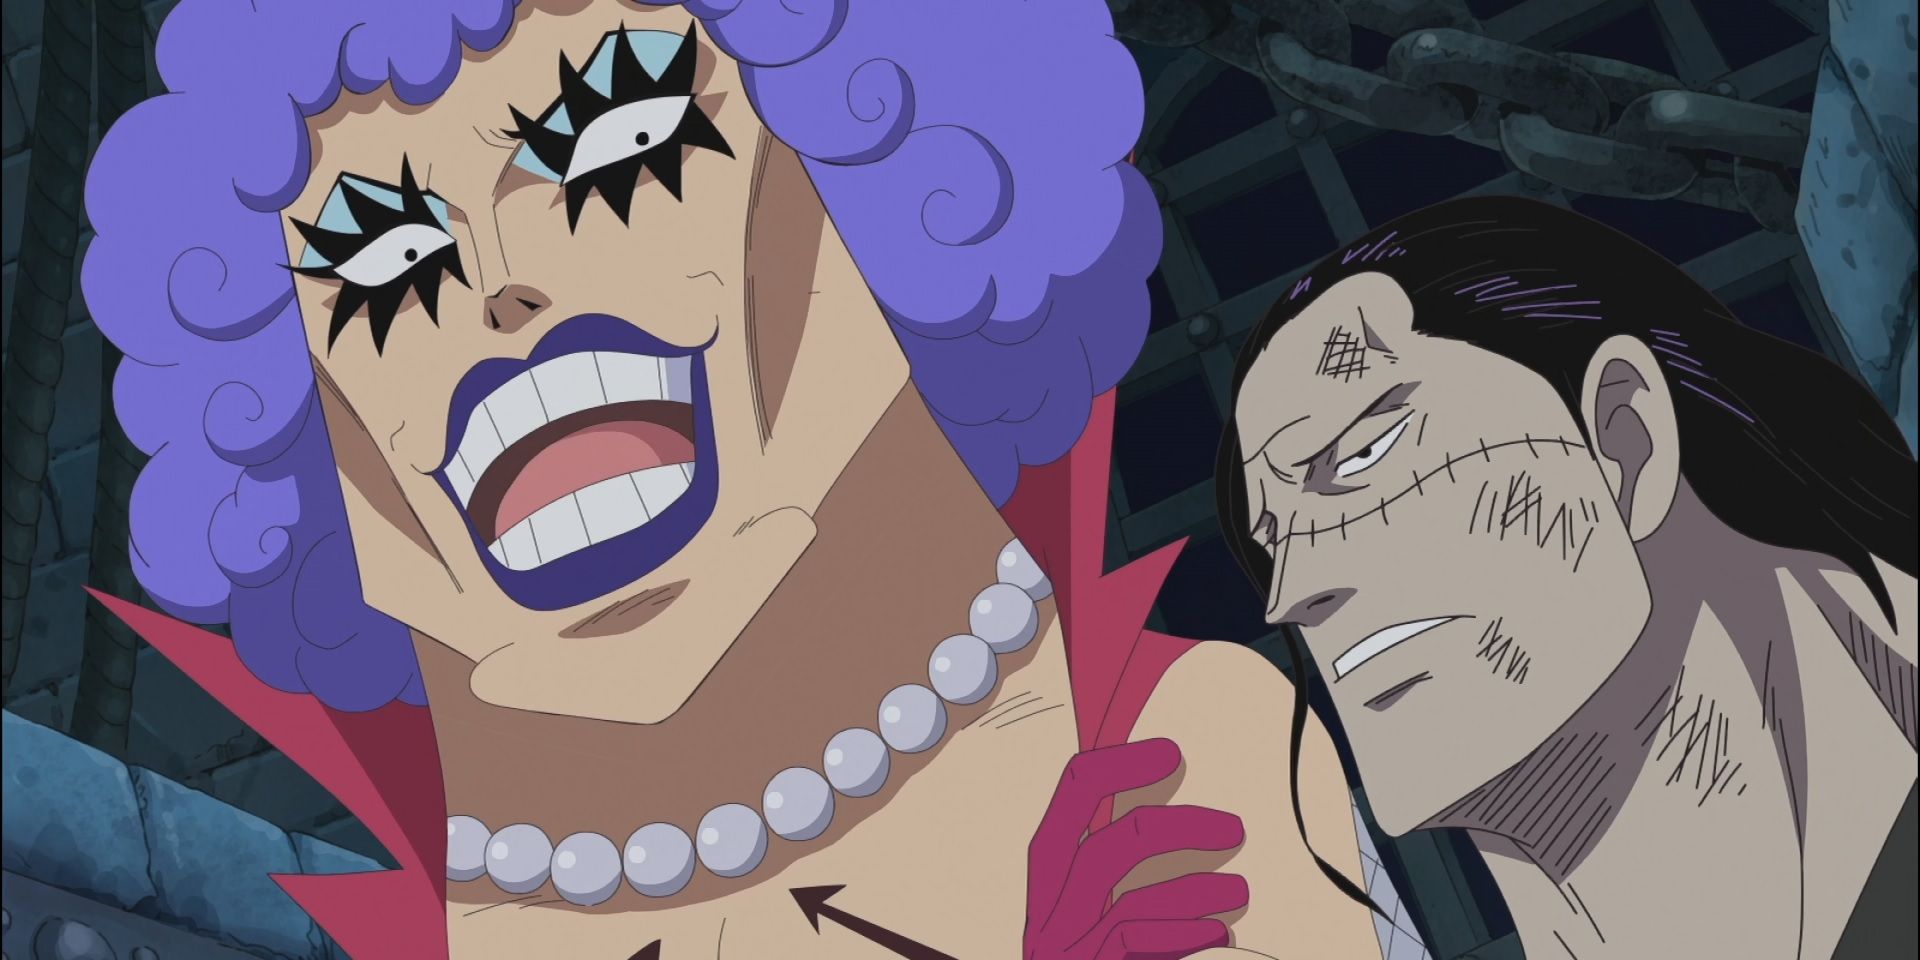 Ivankov grins and Crocodile groans as they stand next to each other in One Piece anime.